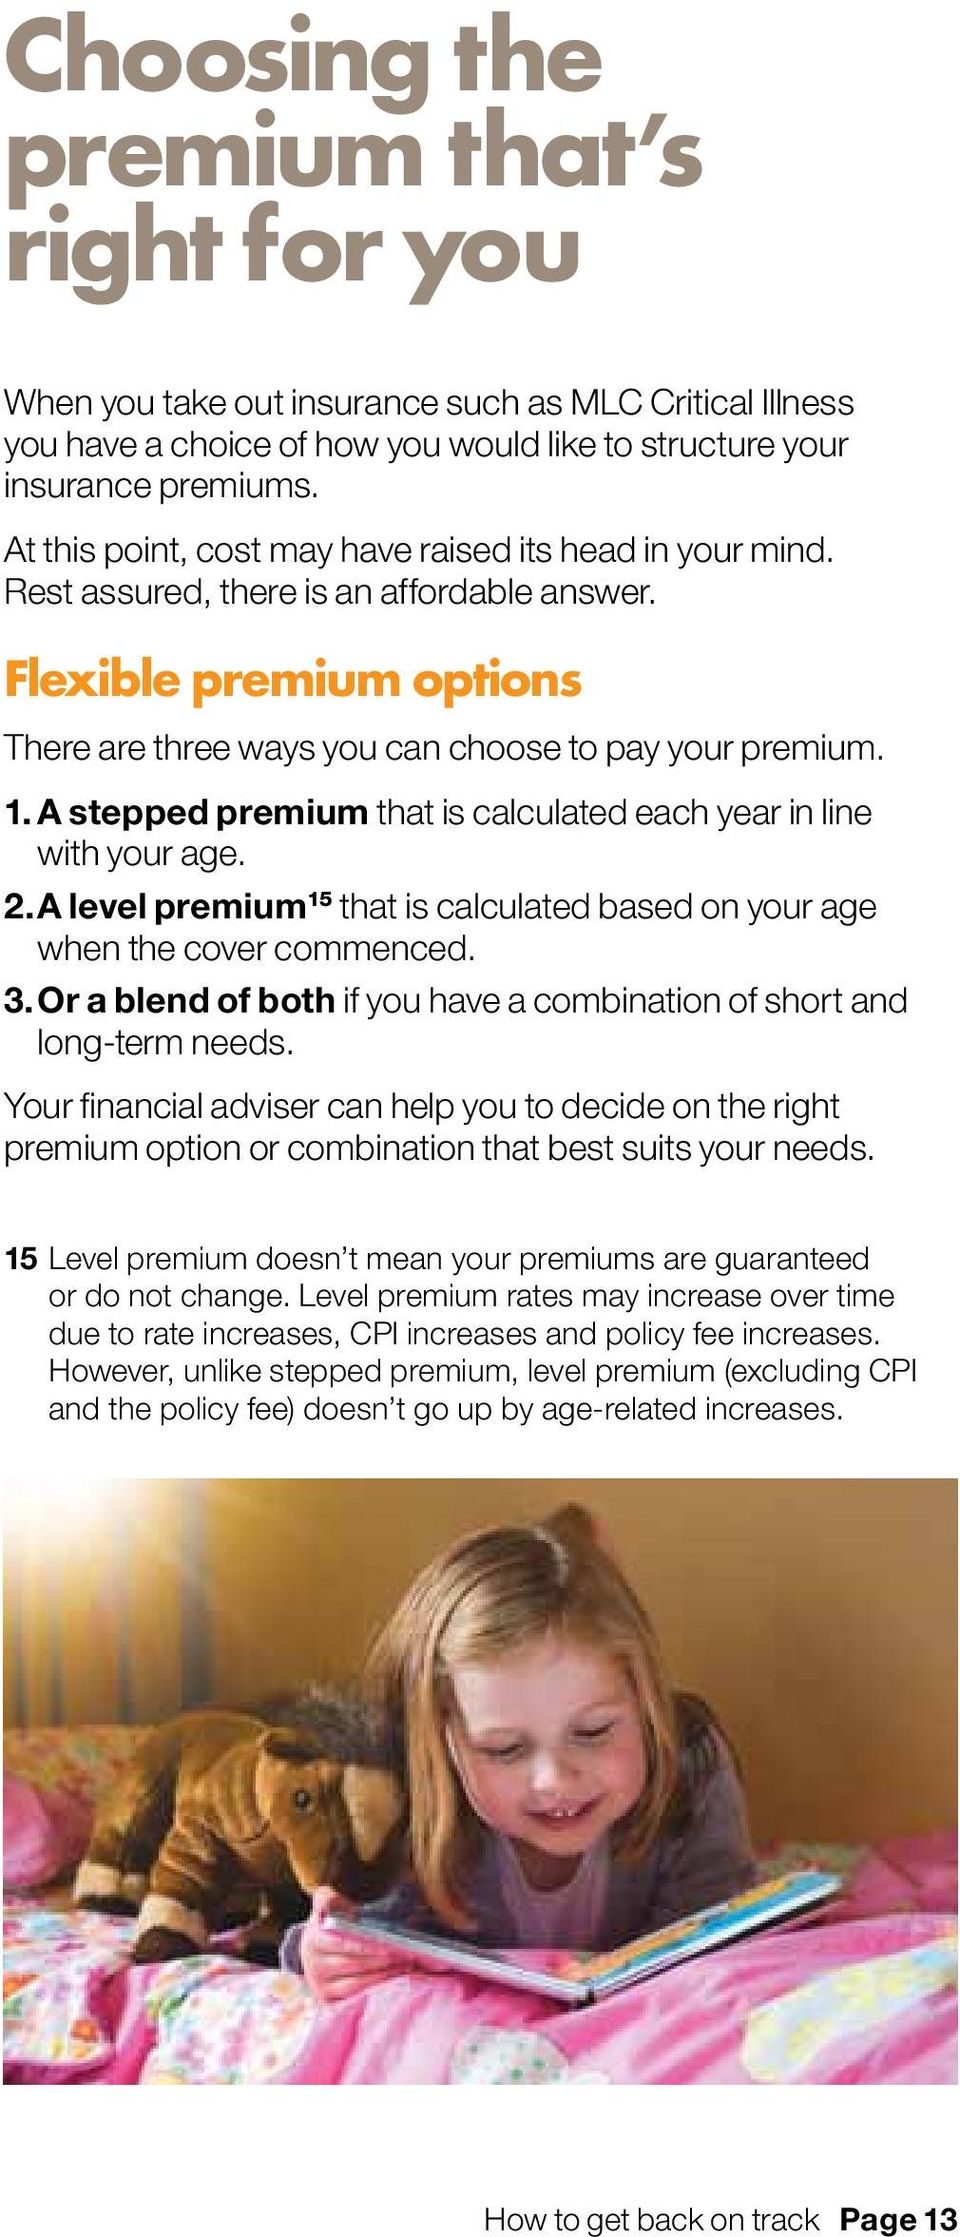 A stepped premium that is calculated each year in line with your age. 2. A level premium 15 that is calculated based on your age when the cover commenced. 3.